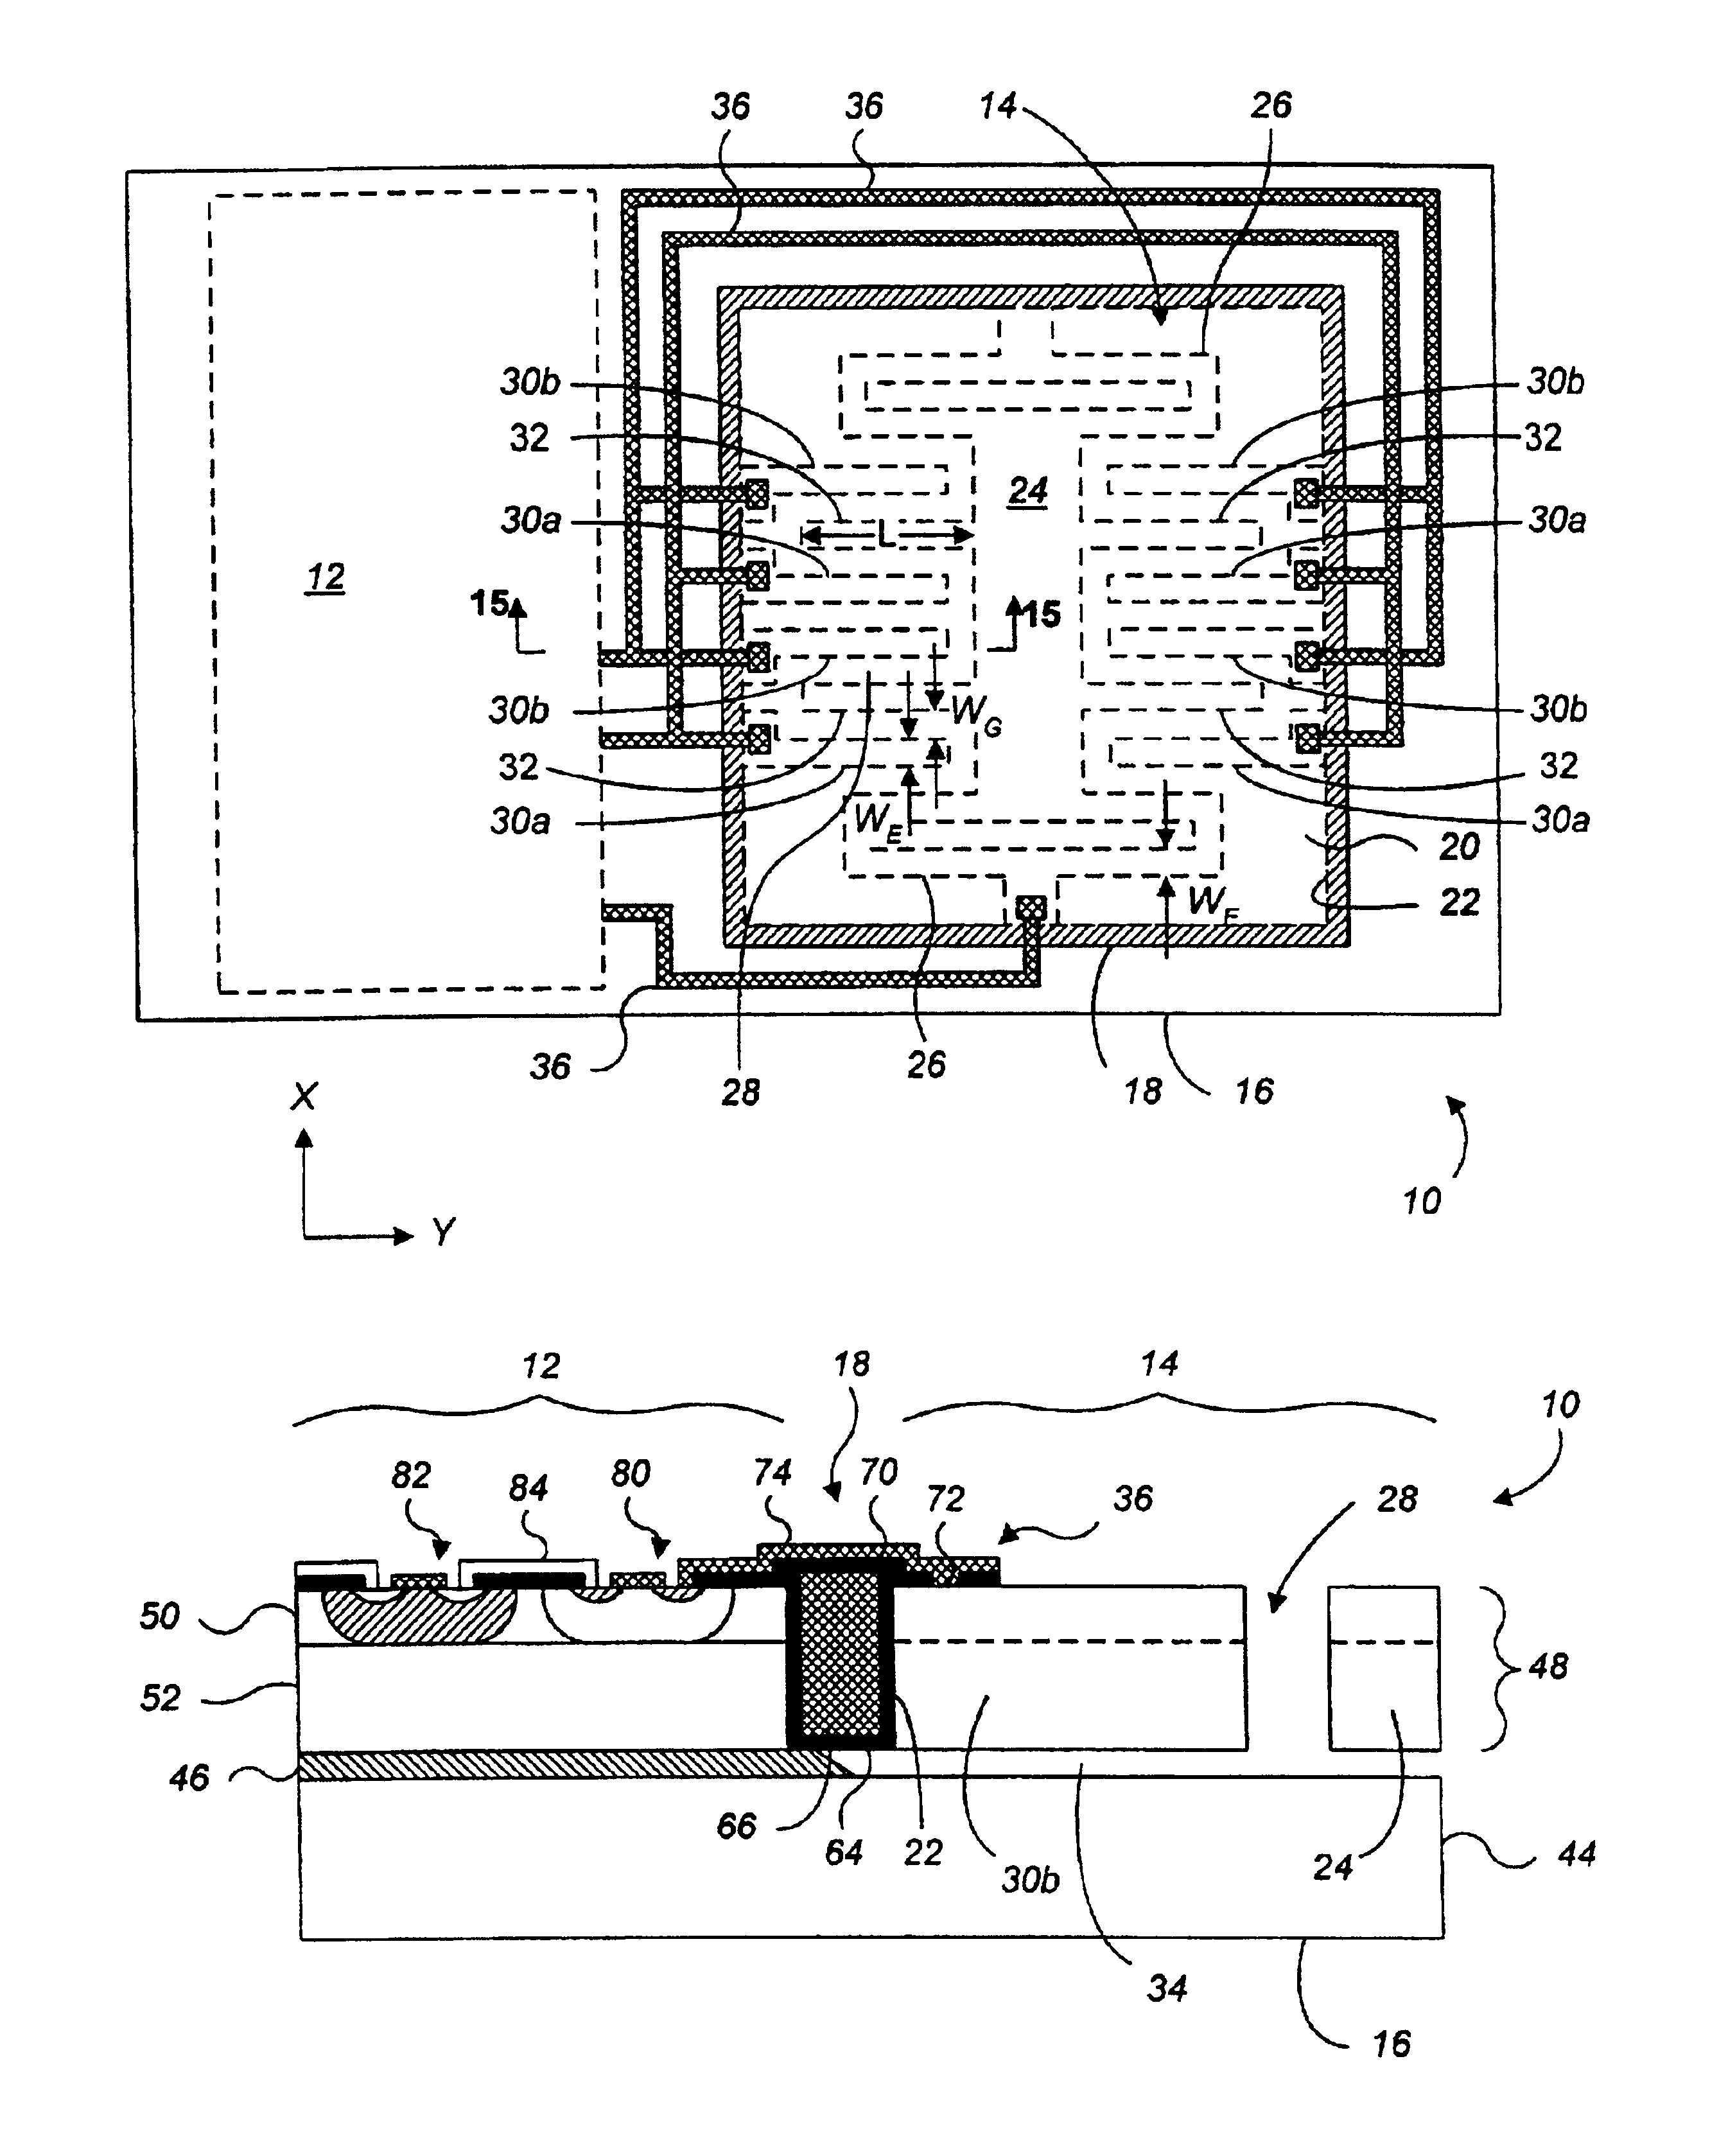 Method of fabricating a microfabricated high aspect ratio device with electrical isolation